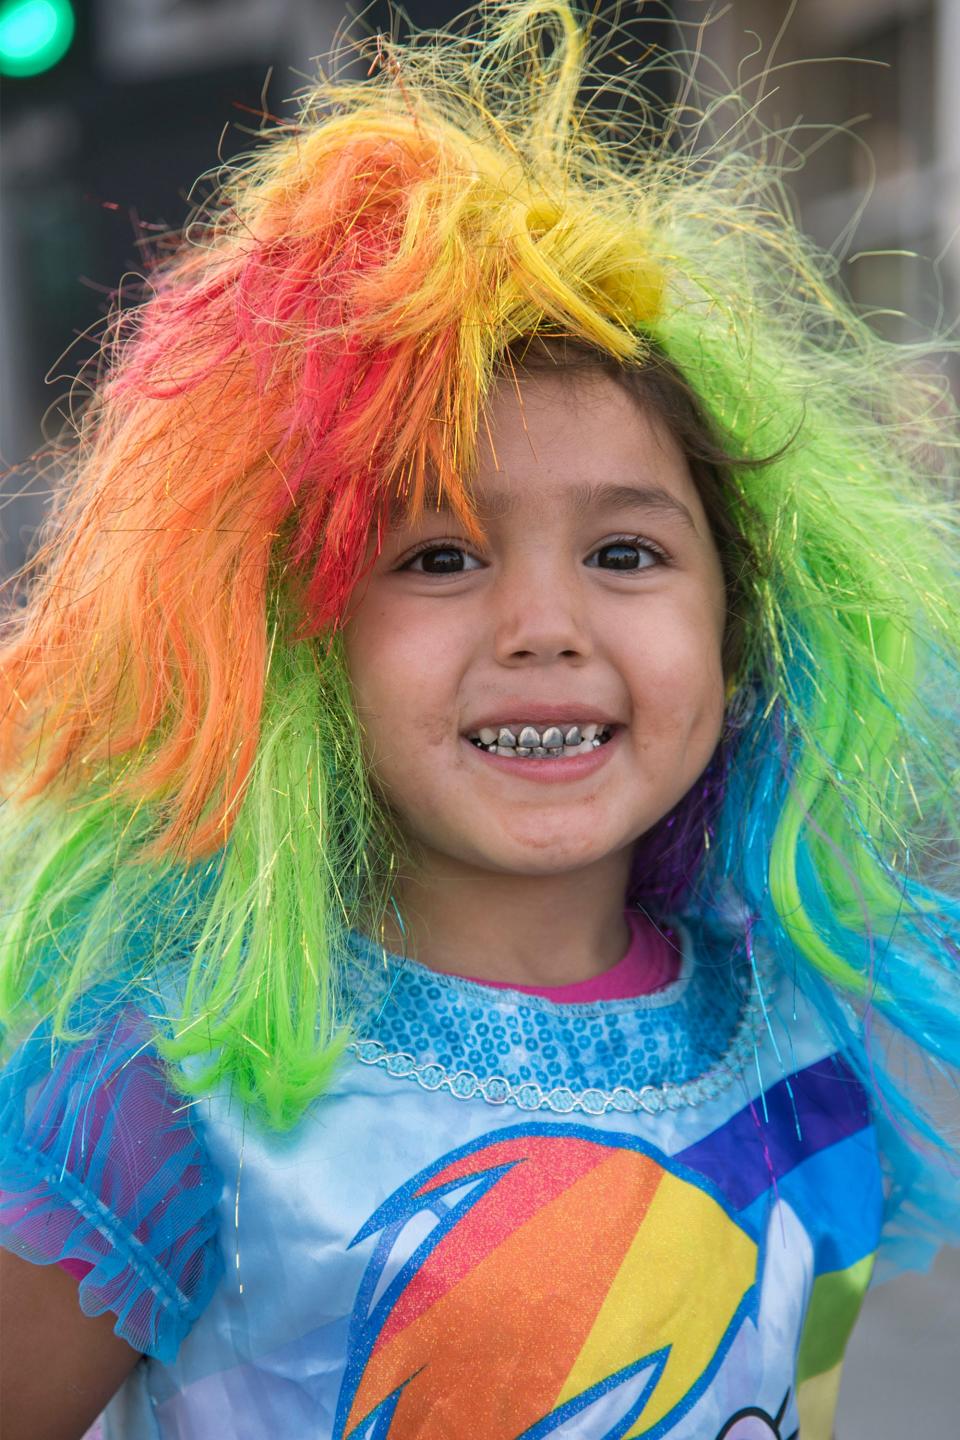 Five-year-old Alexis Barrera dressed in My Little Pony colors during the annual Trick or Treat on the Mile event along Pacific Avenue on the Miracle Mile in Stockton. This is an example of a rainbow of colors making a photo eye-catching.